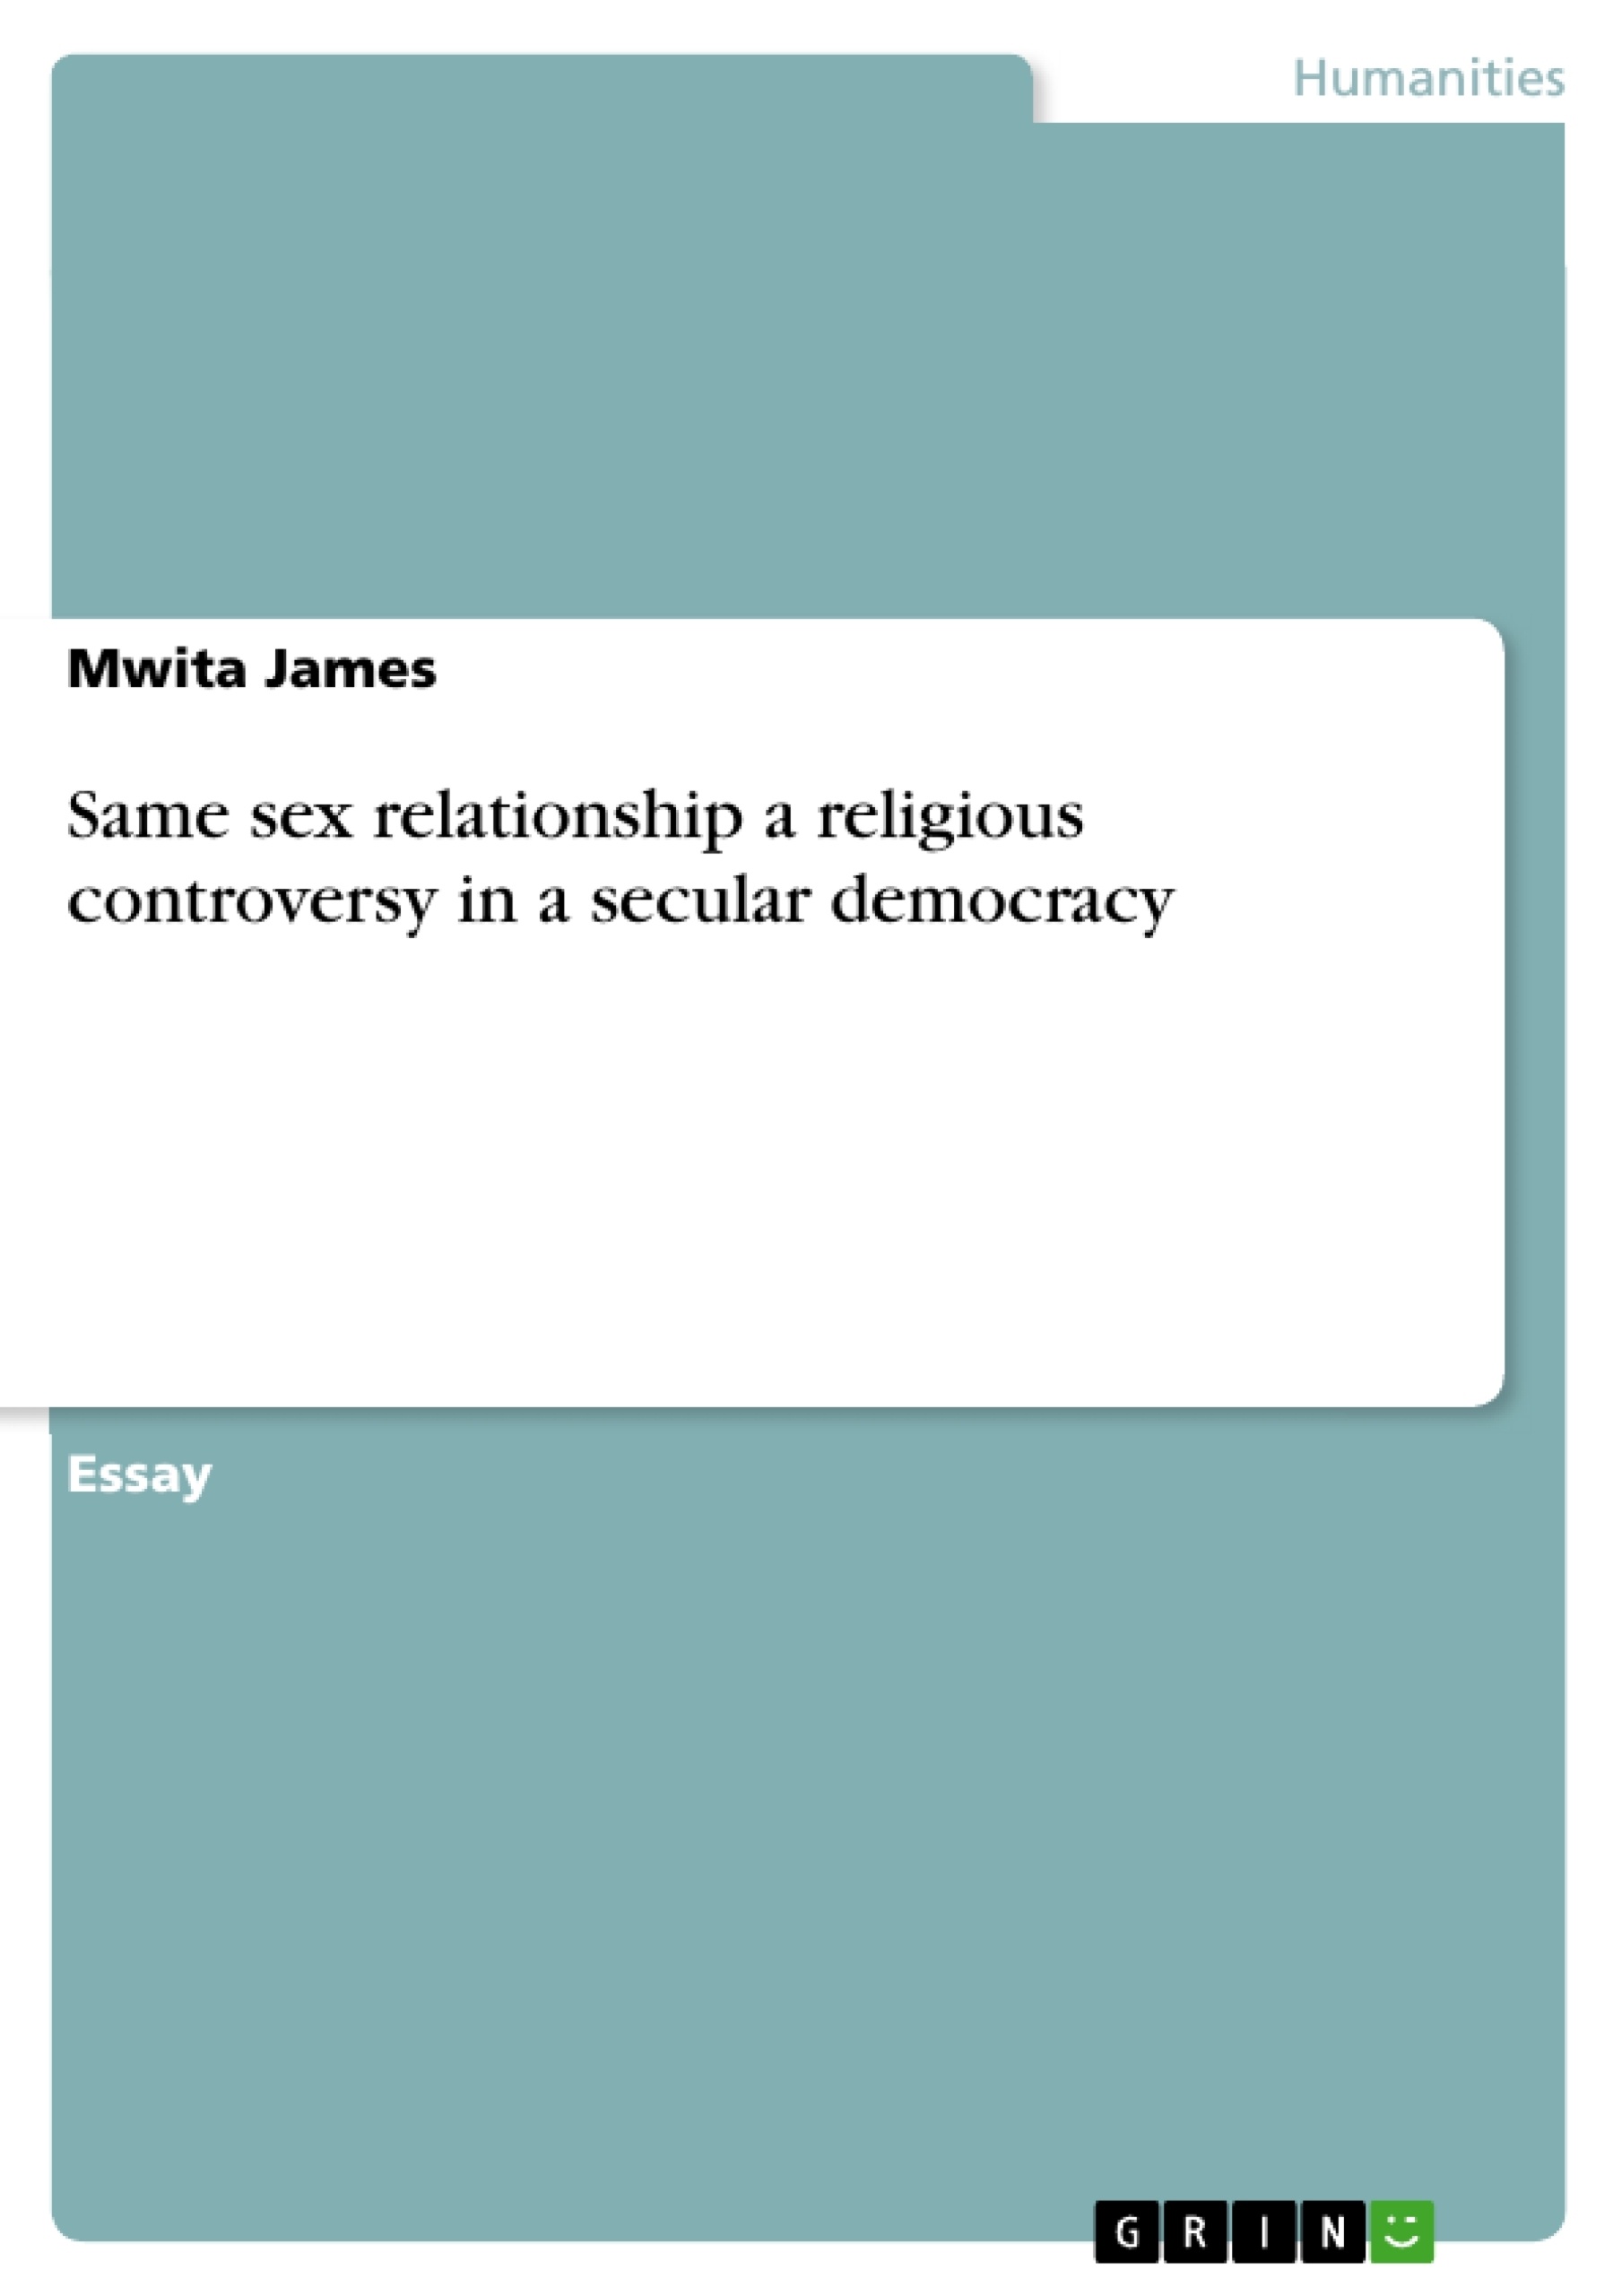 Titre: Same sex relationship a religious controversy in a secular democracy